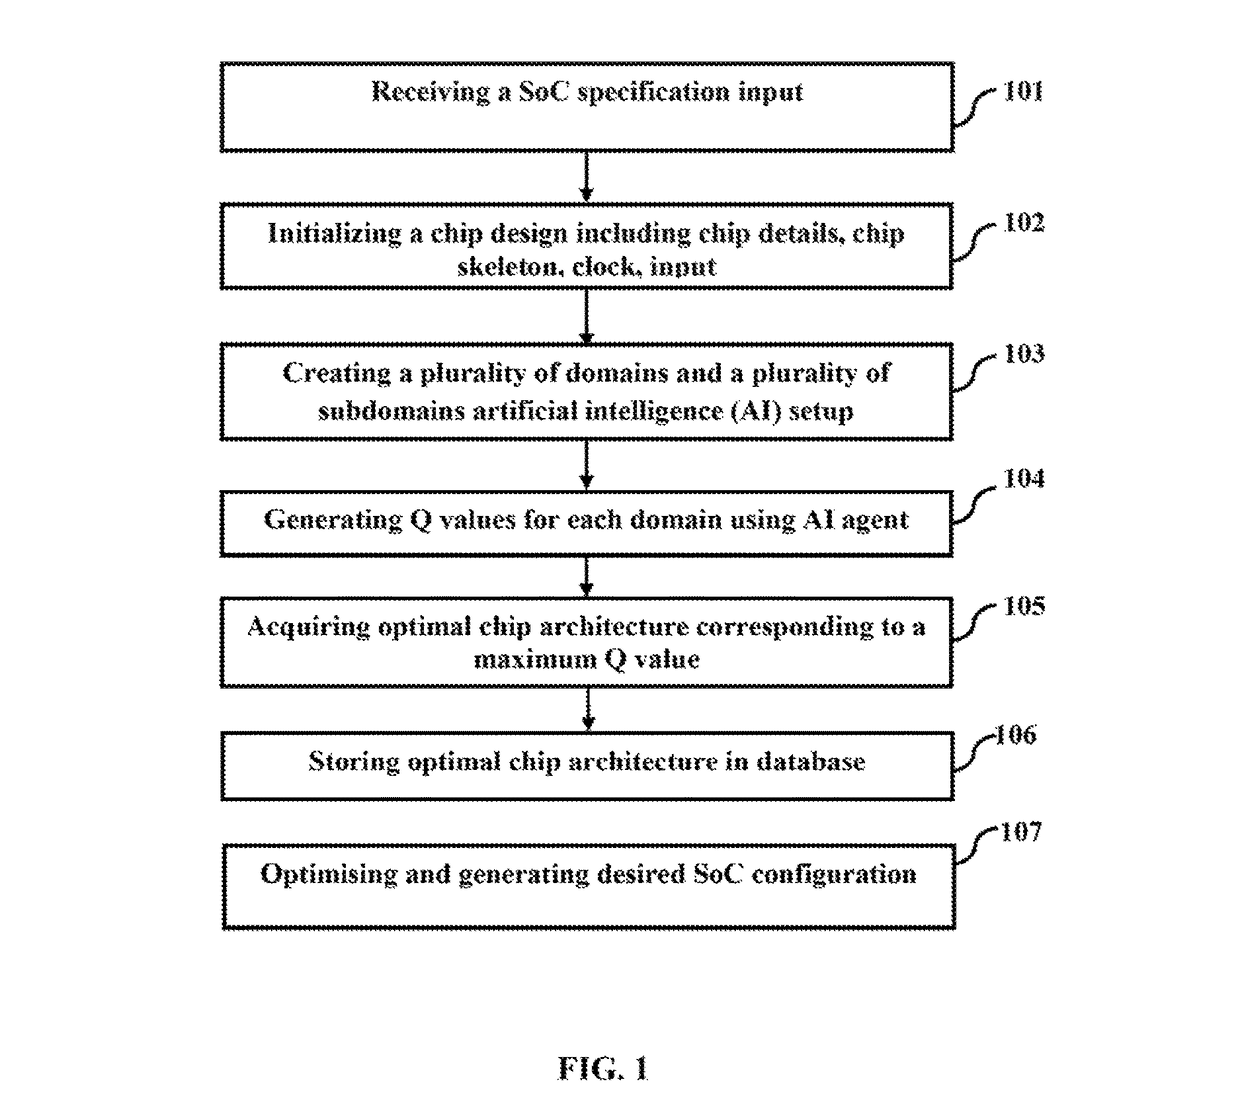 System and method for designing system on chip (SoC) circuits through artificial intelligence and reinforcement learning